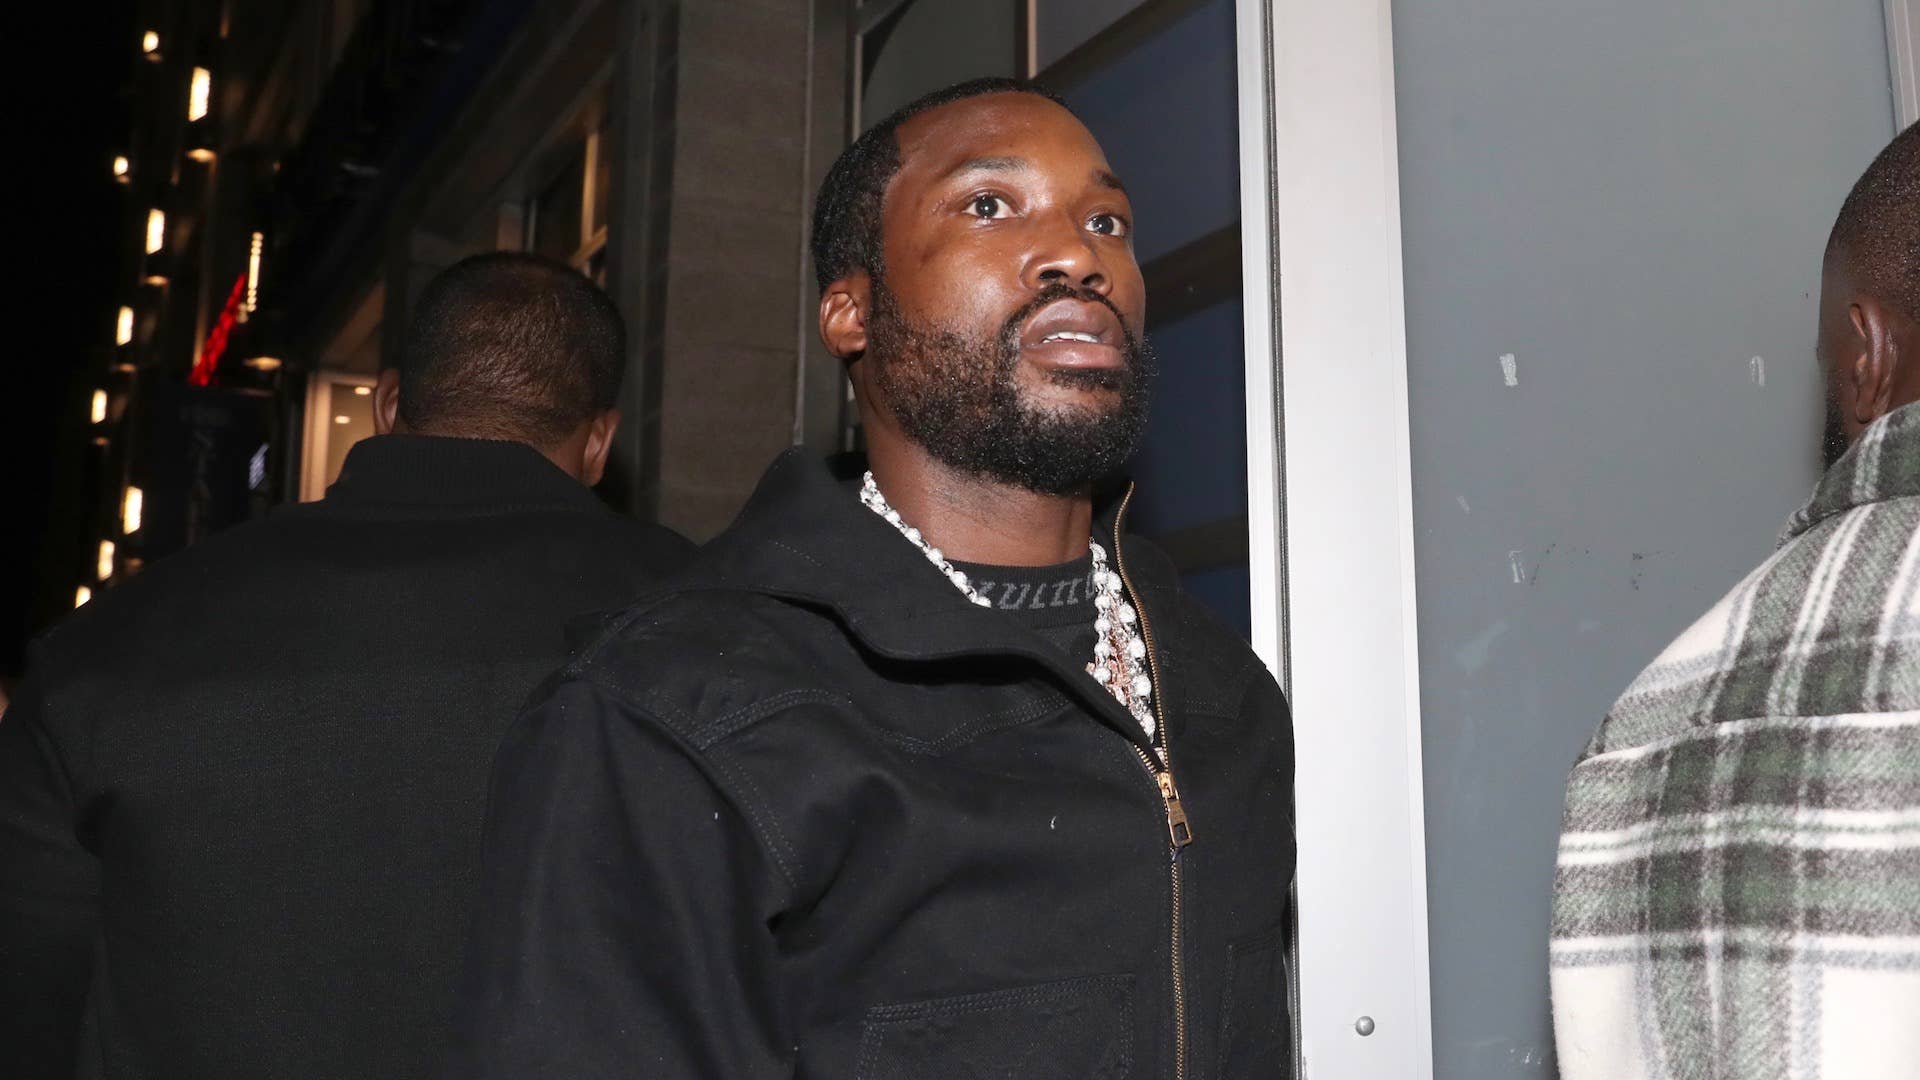 Meek Mill attends his Birthday Celebration at Harbor New York City